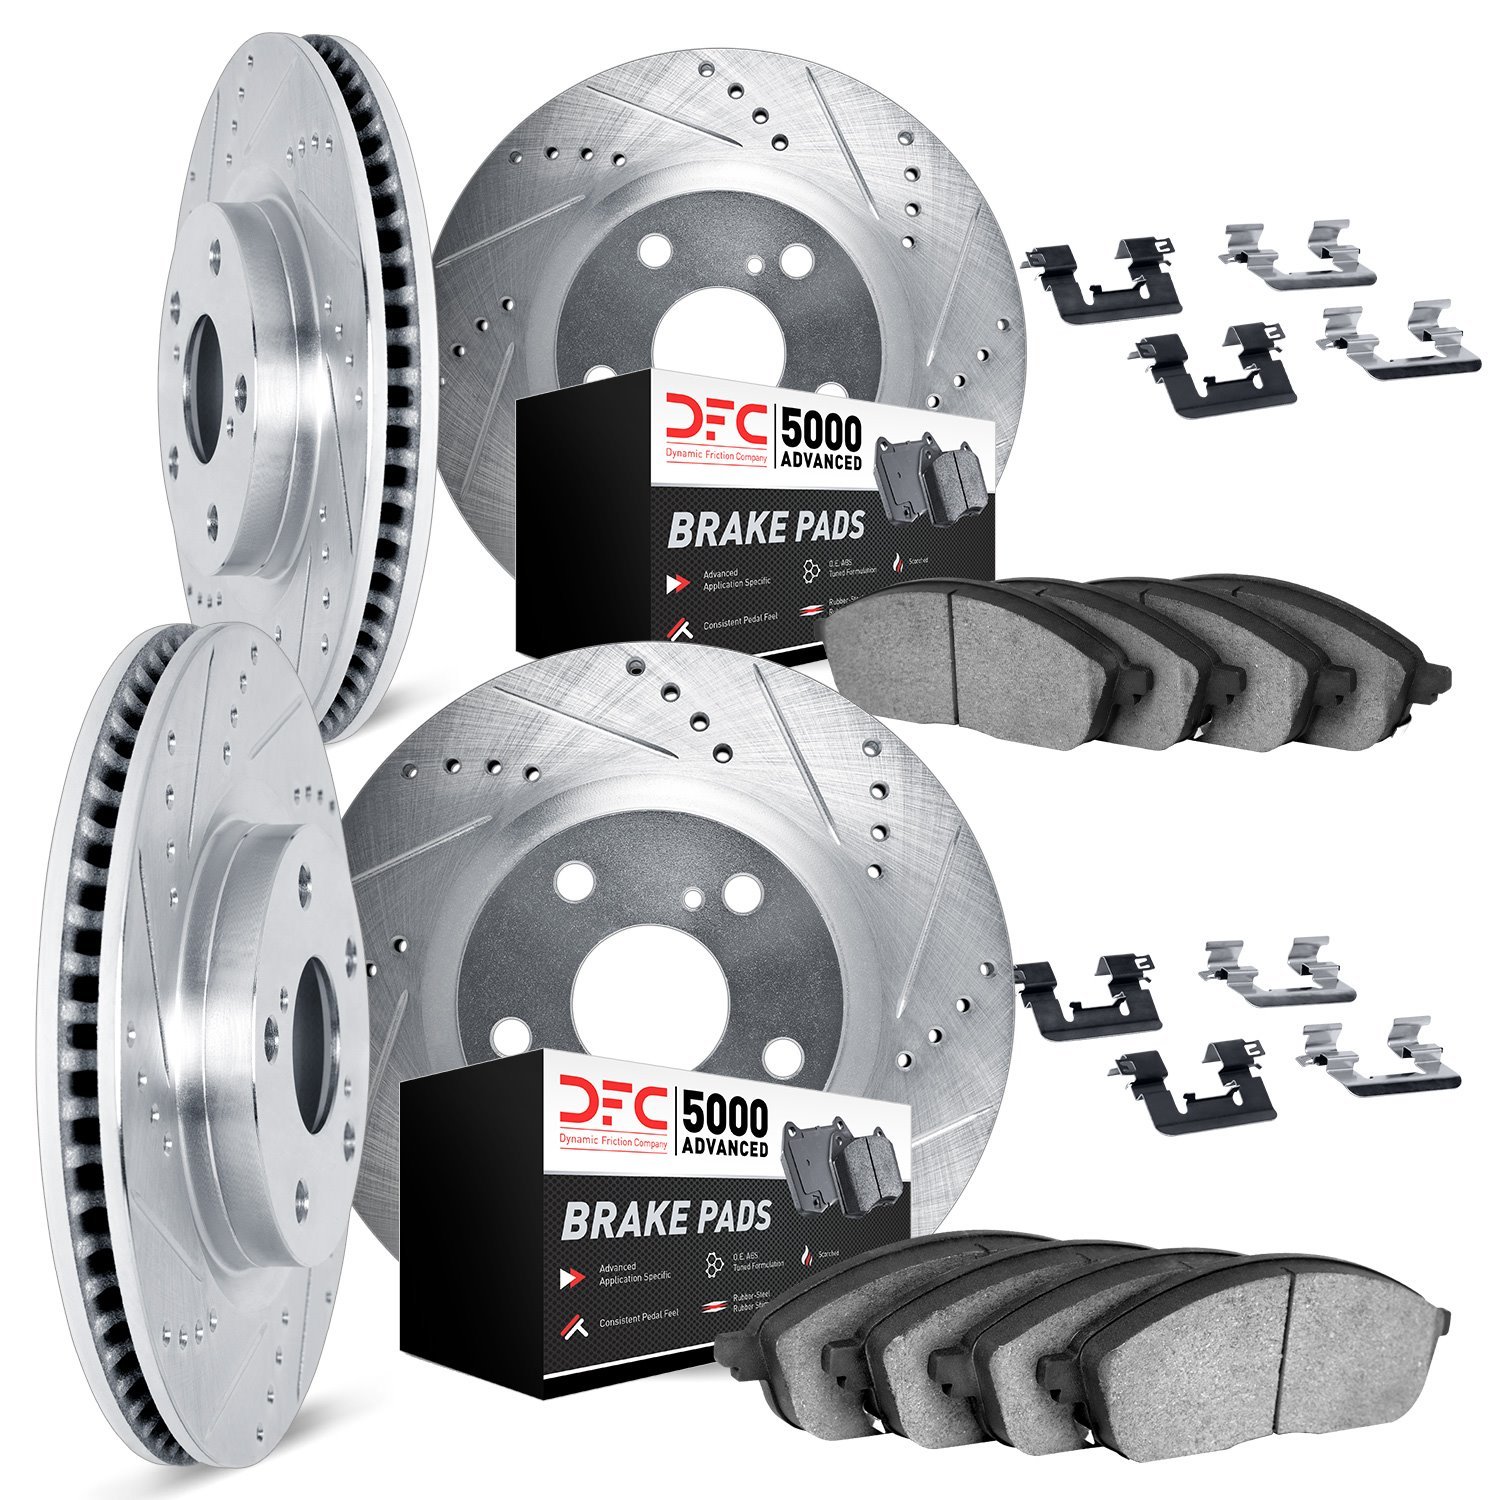 7514-68010 Drilled/Slotted Brake Rotors w/5000 Advanced Brake Pads Kit & Hardware [Silver], Fits Select Infiniti/Nissan, Positio